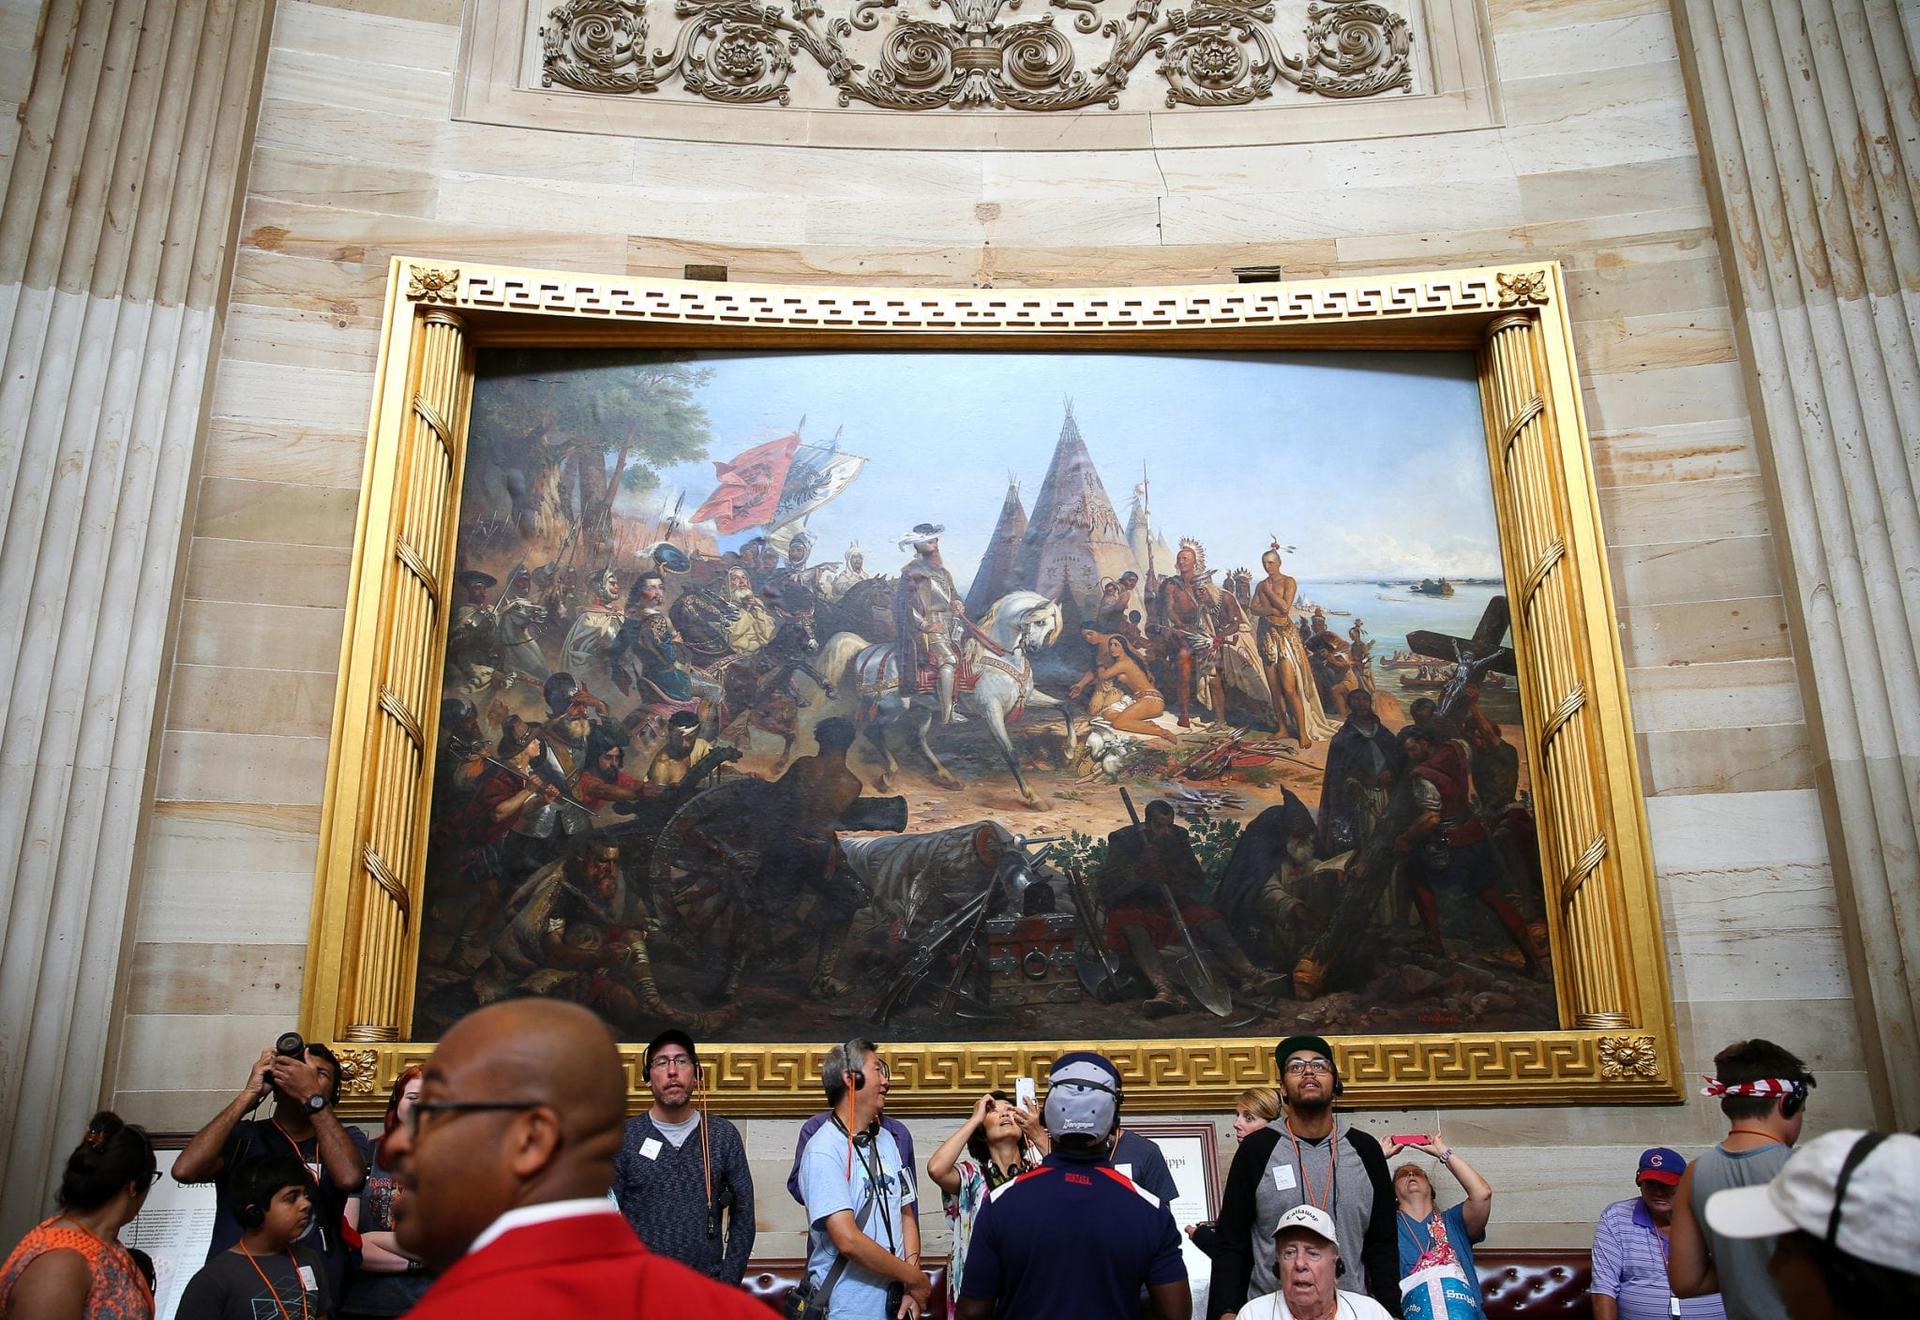 Images of faith preserved at Capitol attest to role of religion in U.S.